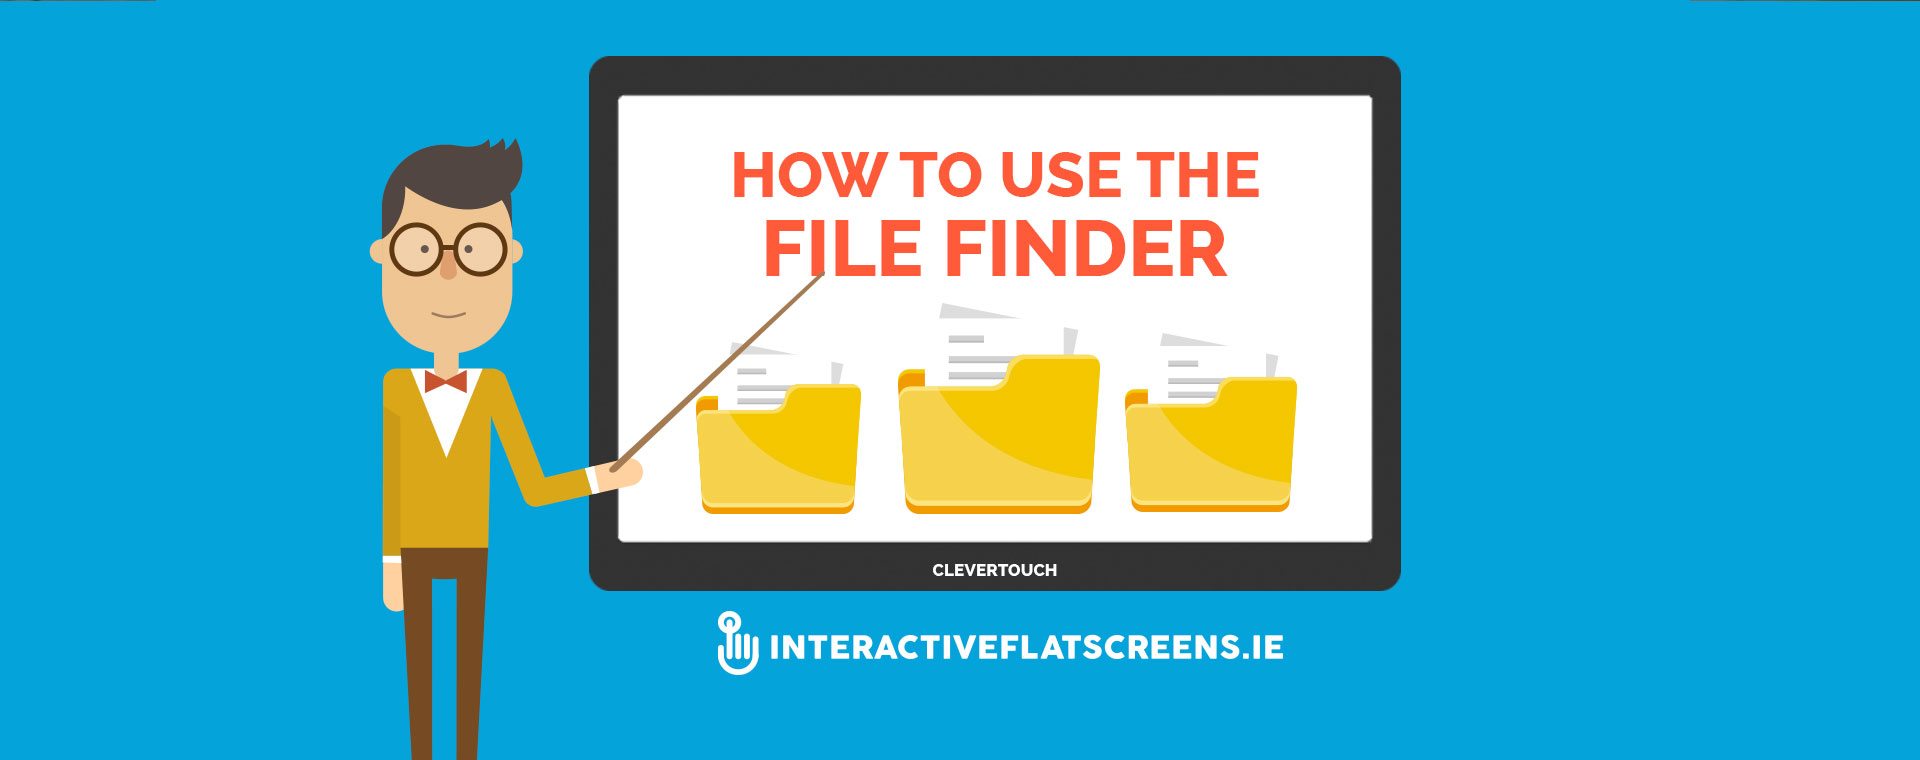 How to Use the File Finder - Interactive Flat Screen Dublin